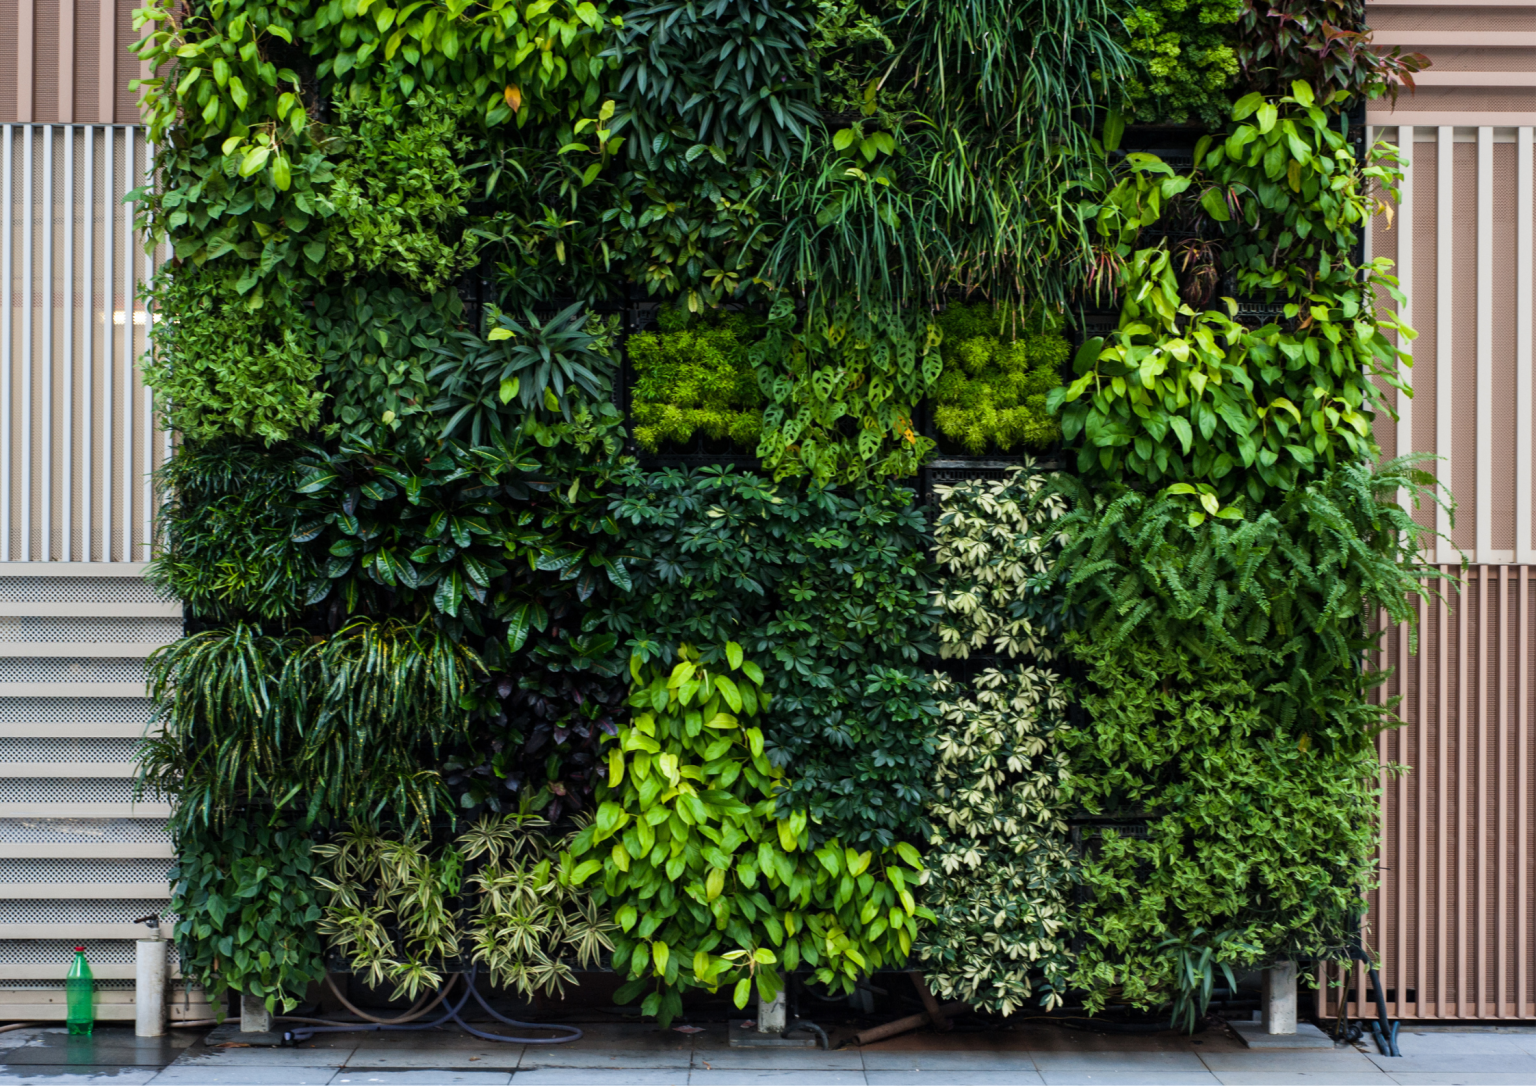 How to Make a Vertical Garden in 8 Easy Steps! - Ideas2Live4